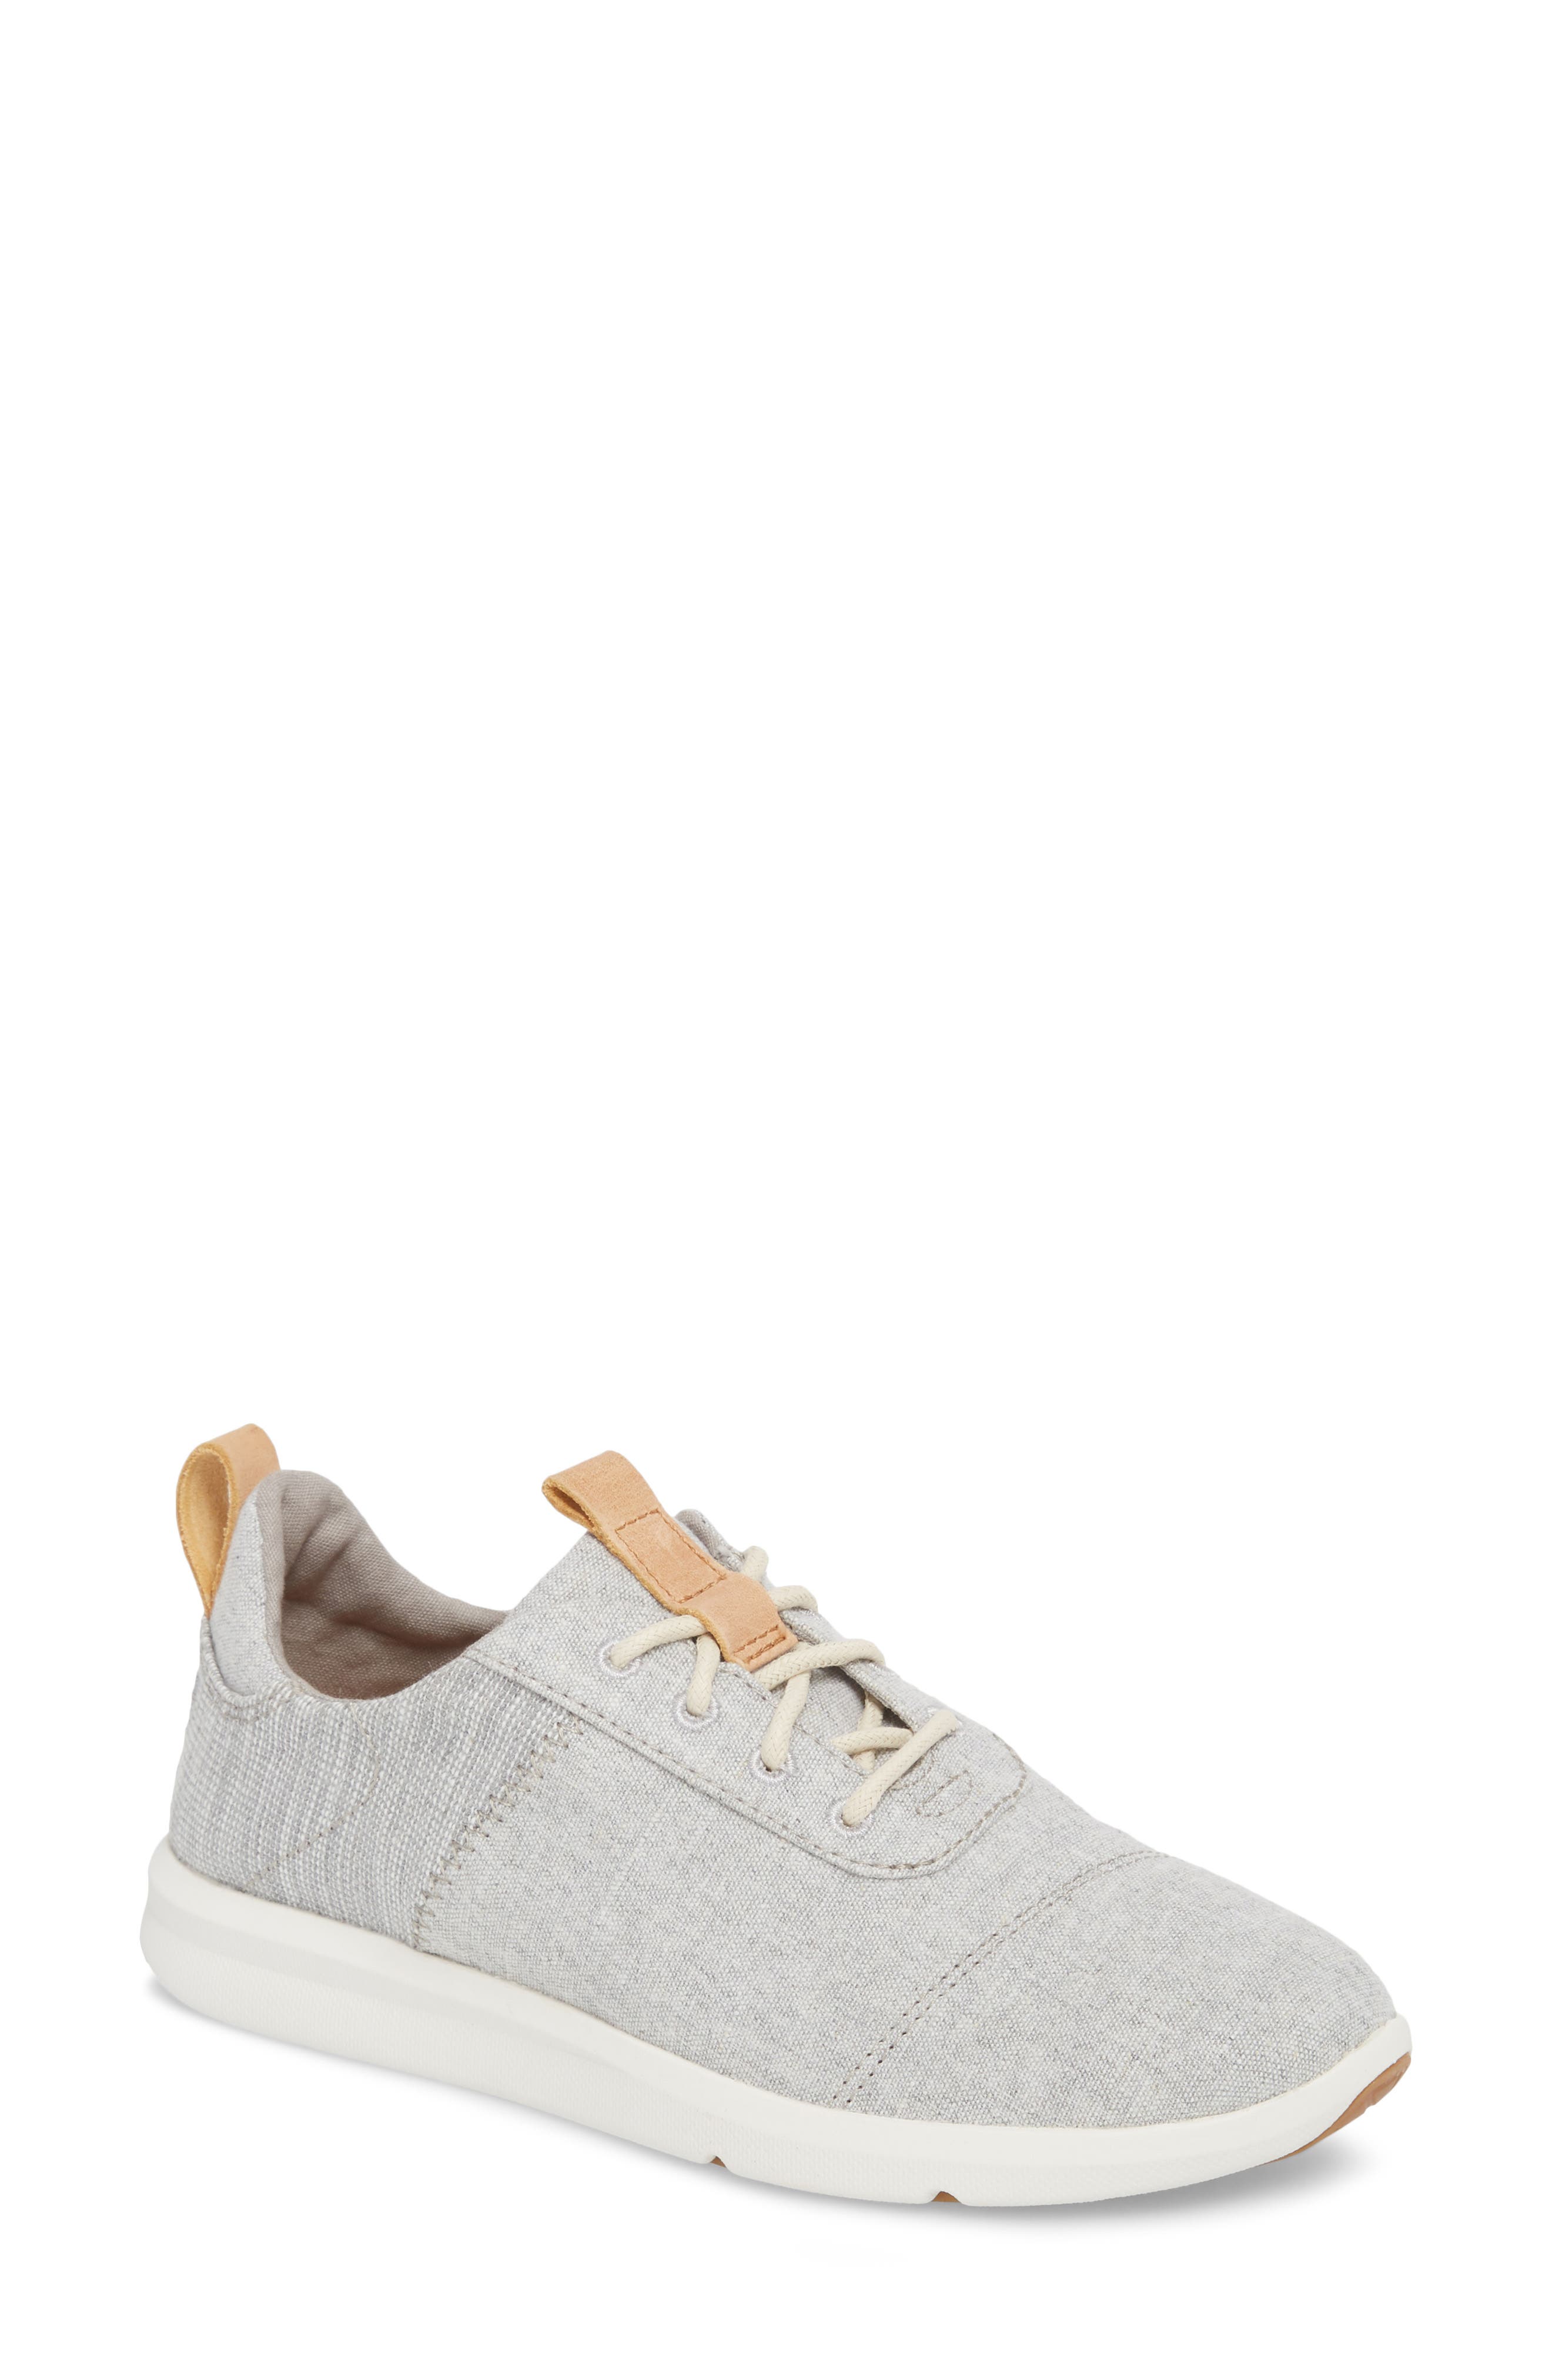 toms tennis shoes womens